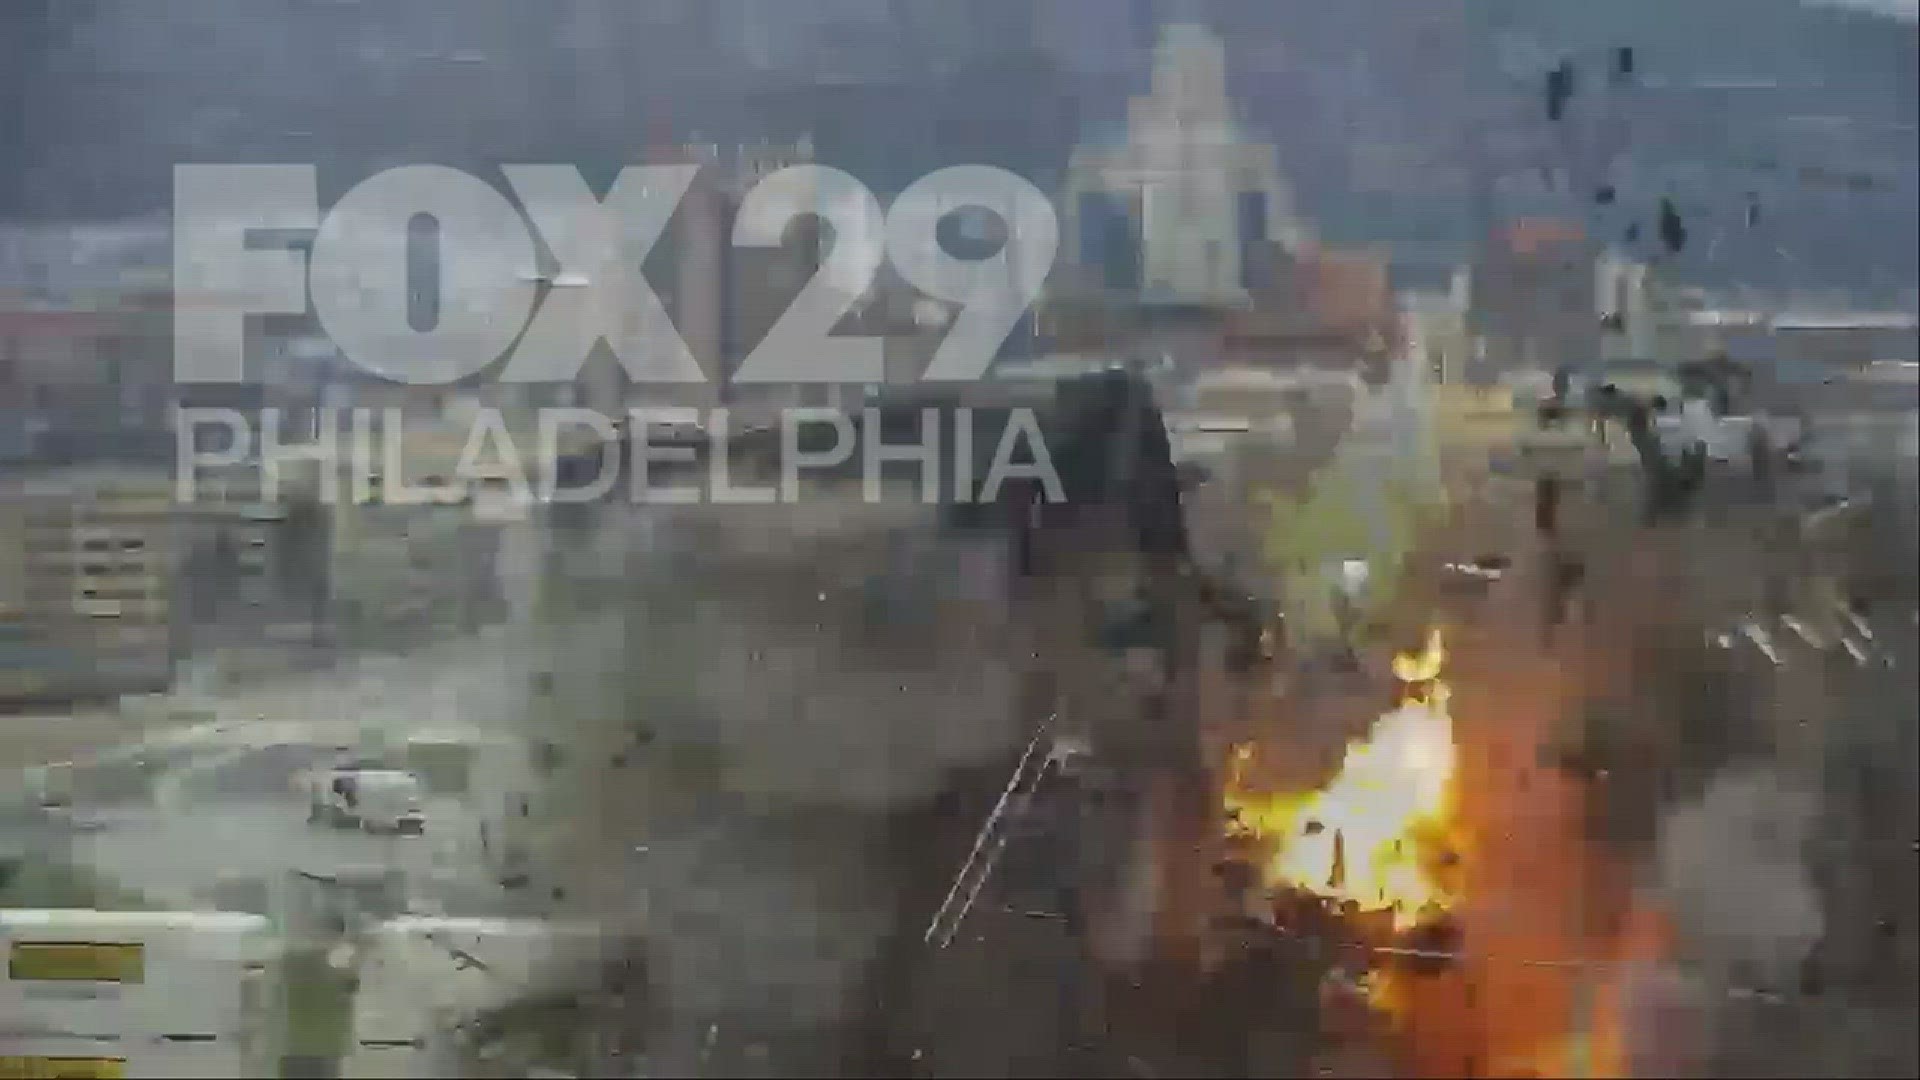 According to the FOX affiliate in Philadelphia, fire crews responded to the area of 2nd Avenue around 5:30 p.m. for reports of a fire at a commercial building.